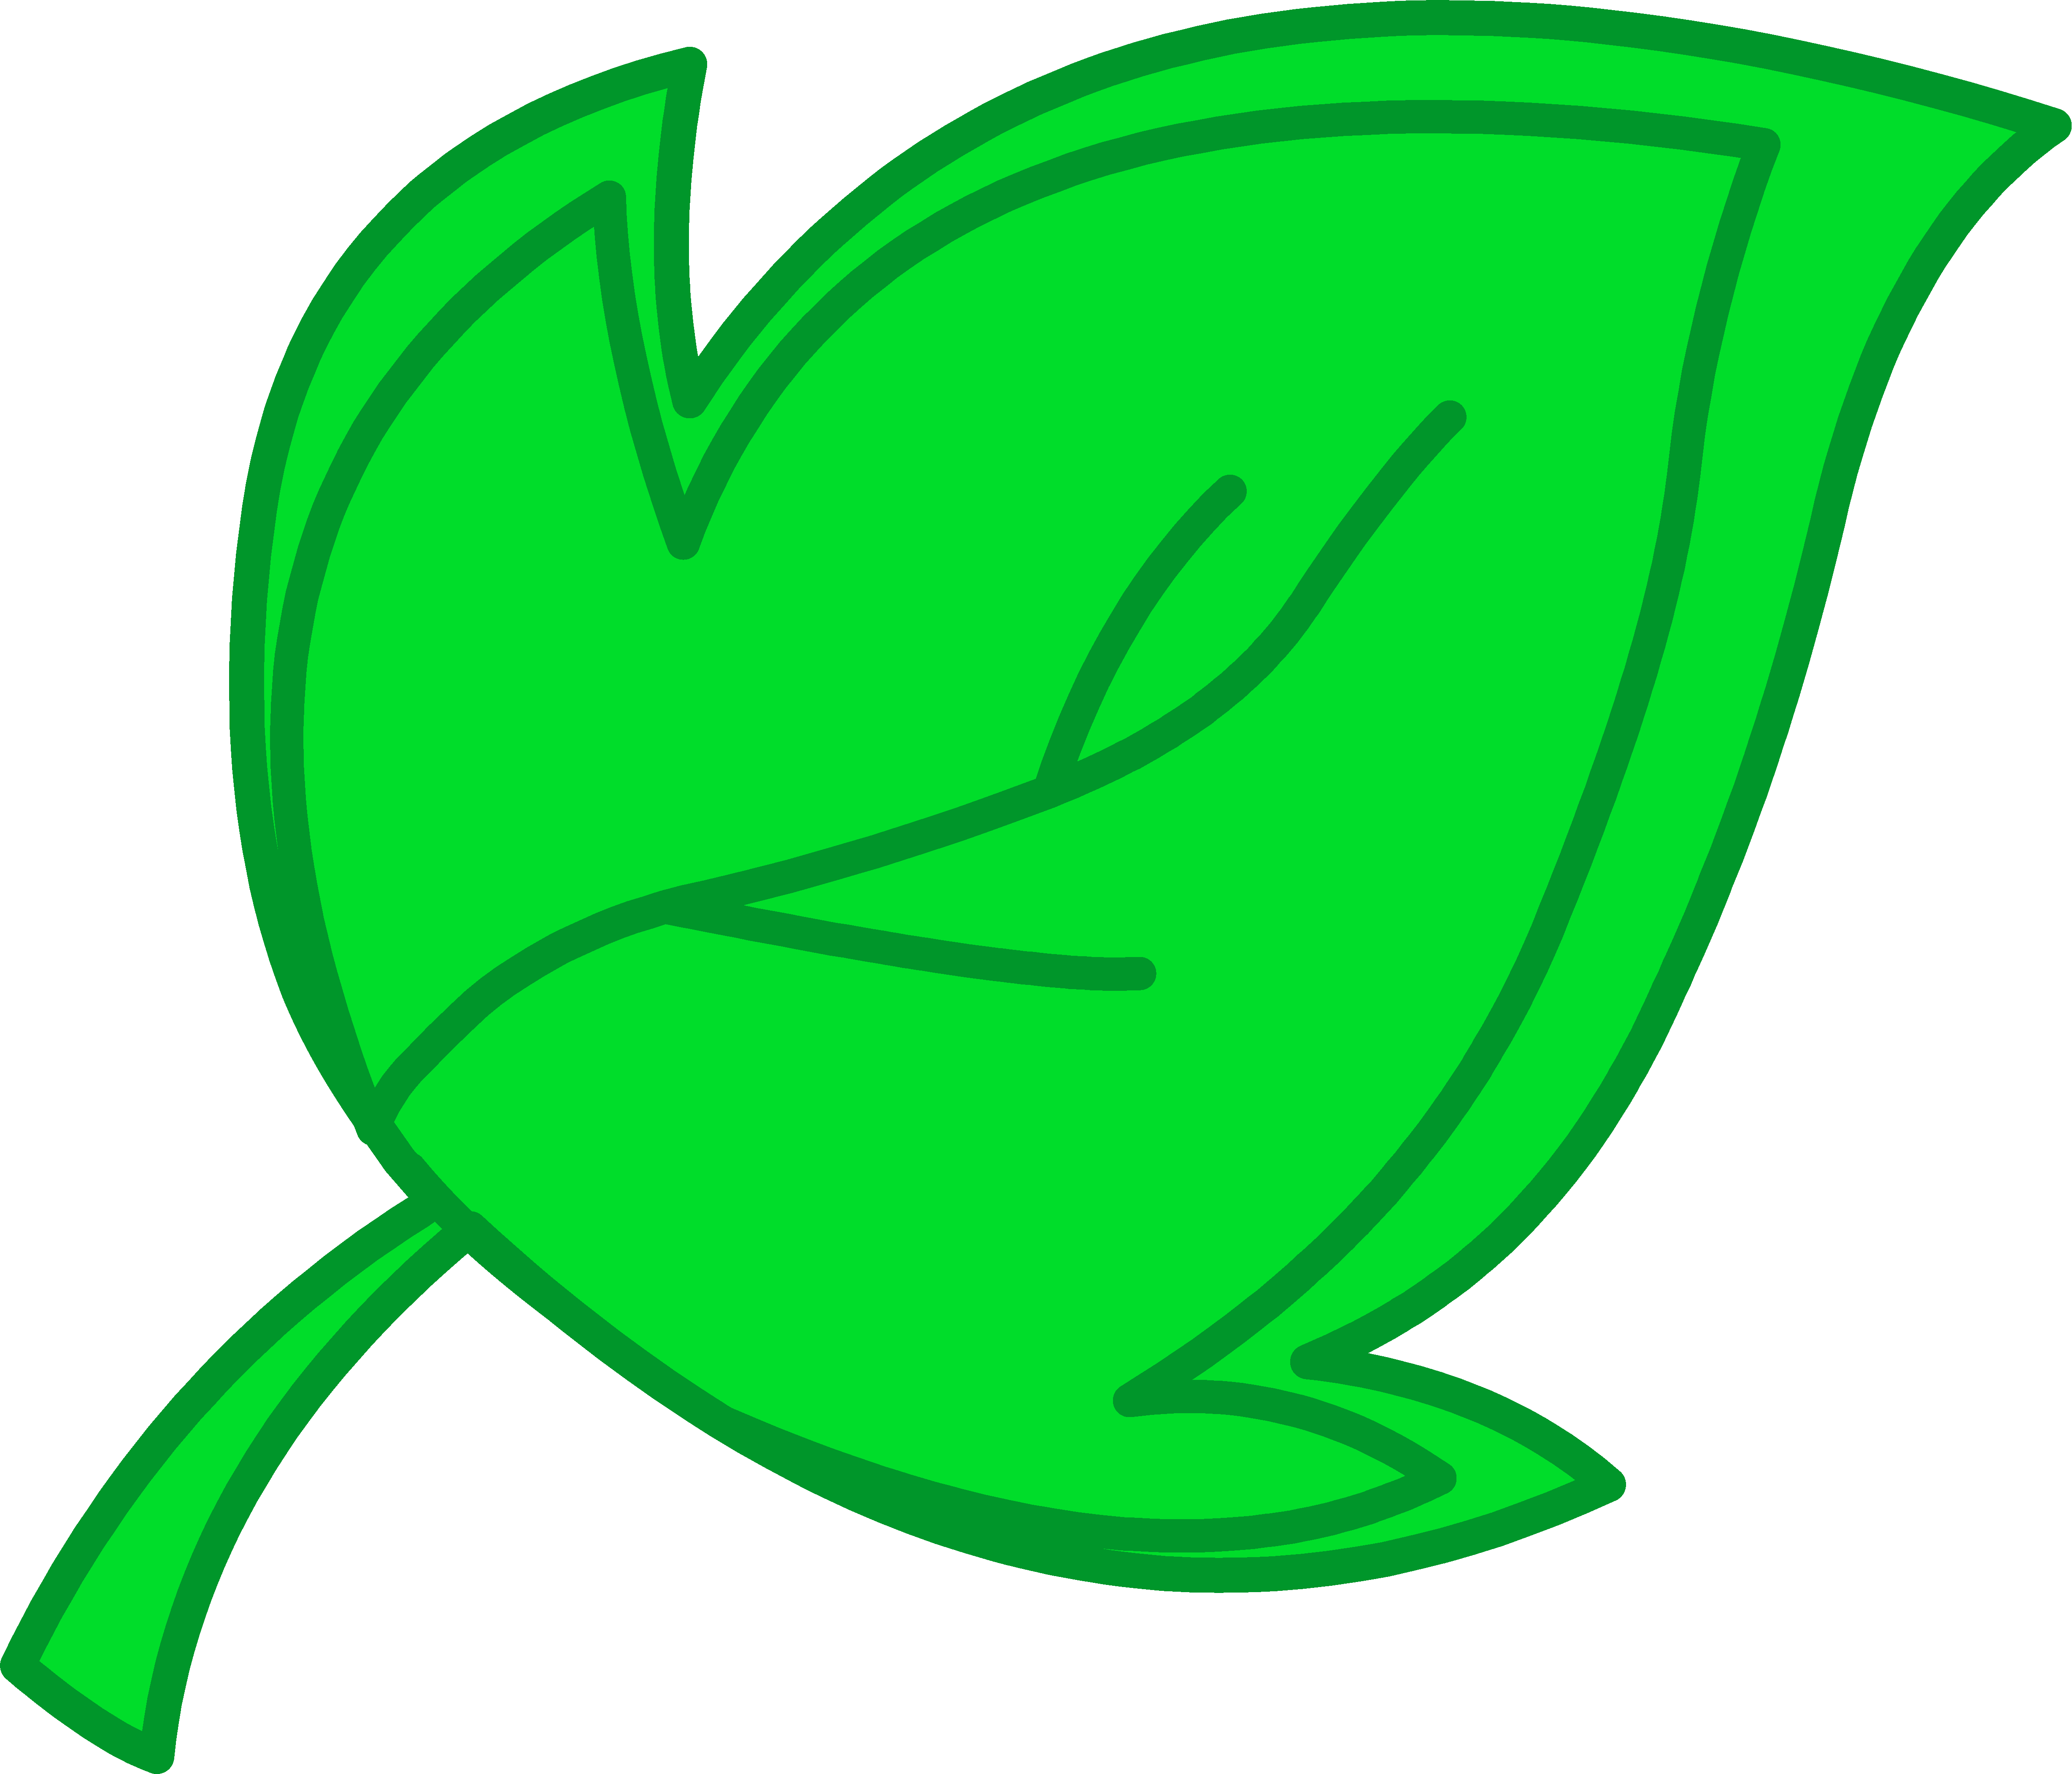 Picture Of A Leaf | Free Download Clip Art | Free Clip Art | on ...